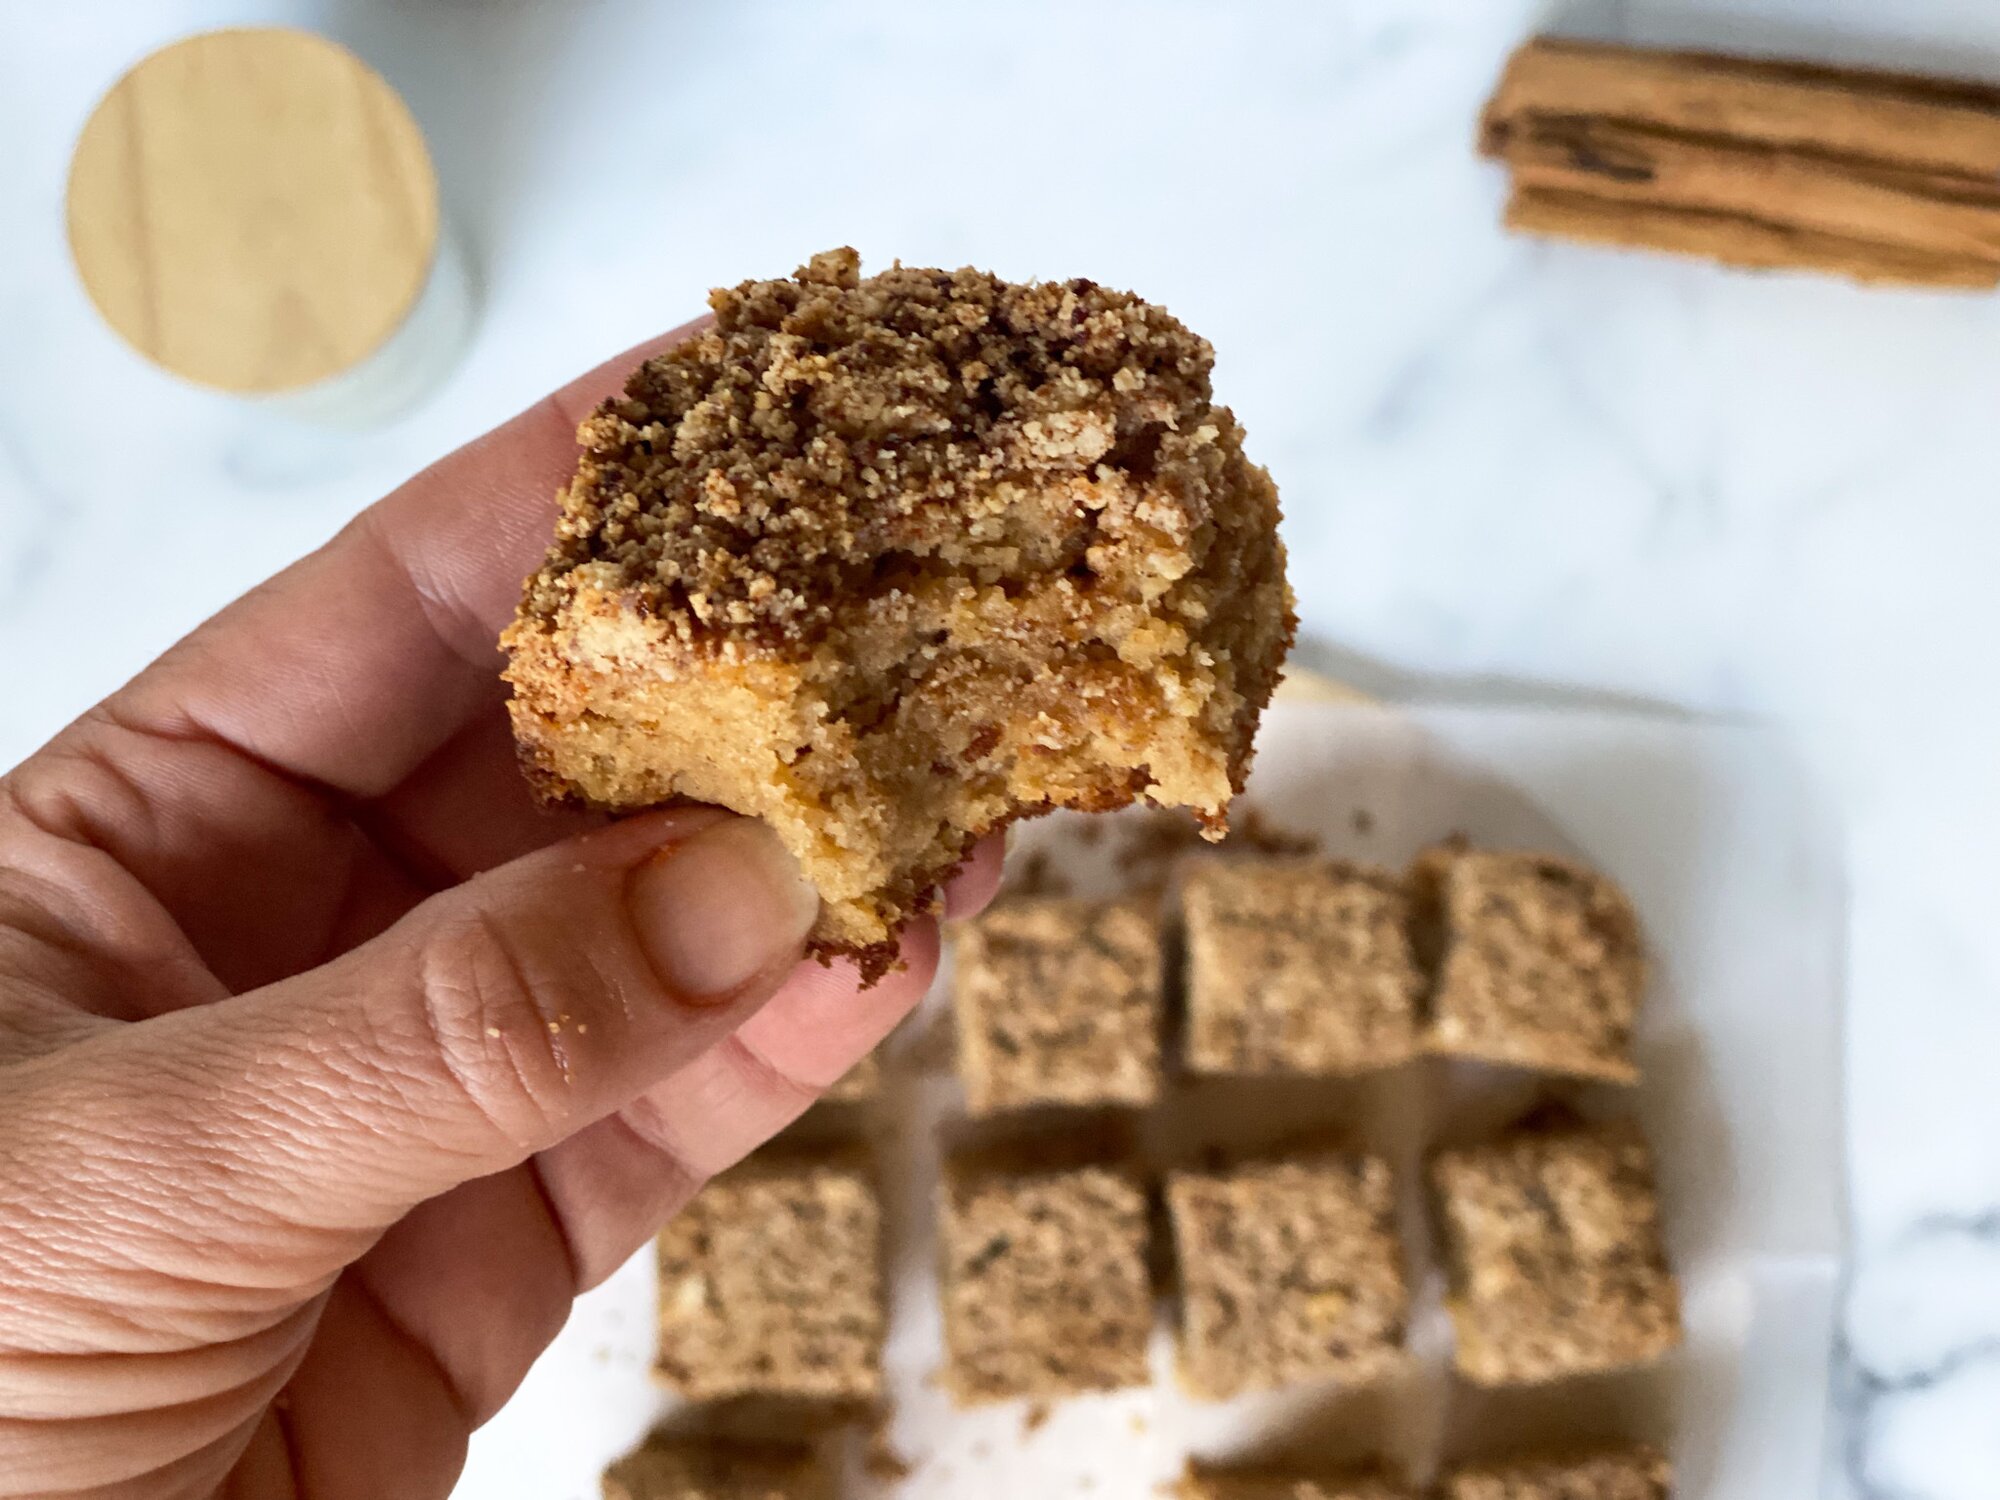 A close up of a hand holding a piece of Spiced Paleo Crumb Cake with a bite taken out of it.